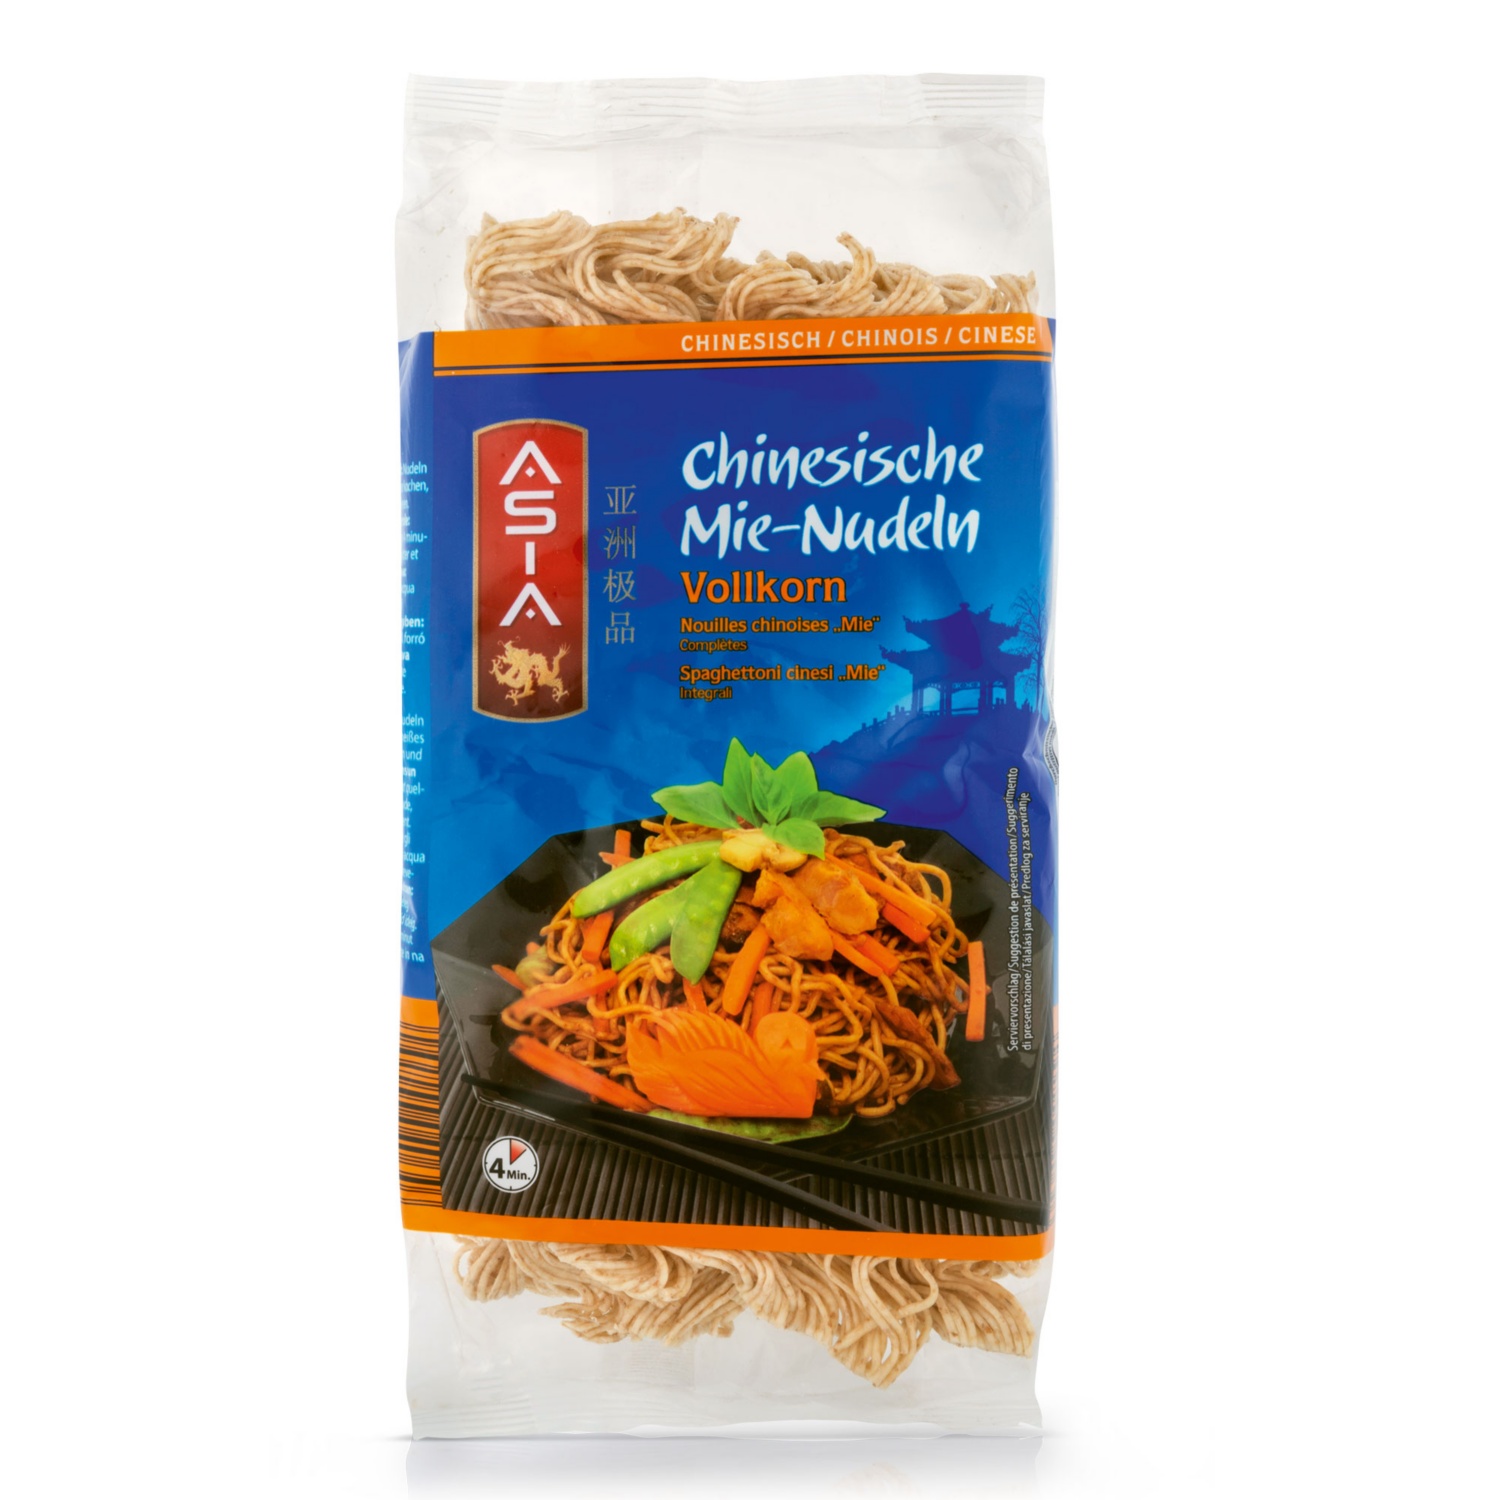 ASIA Mie-Nudeln, Vollkorn